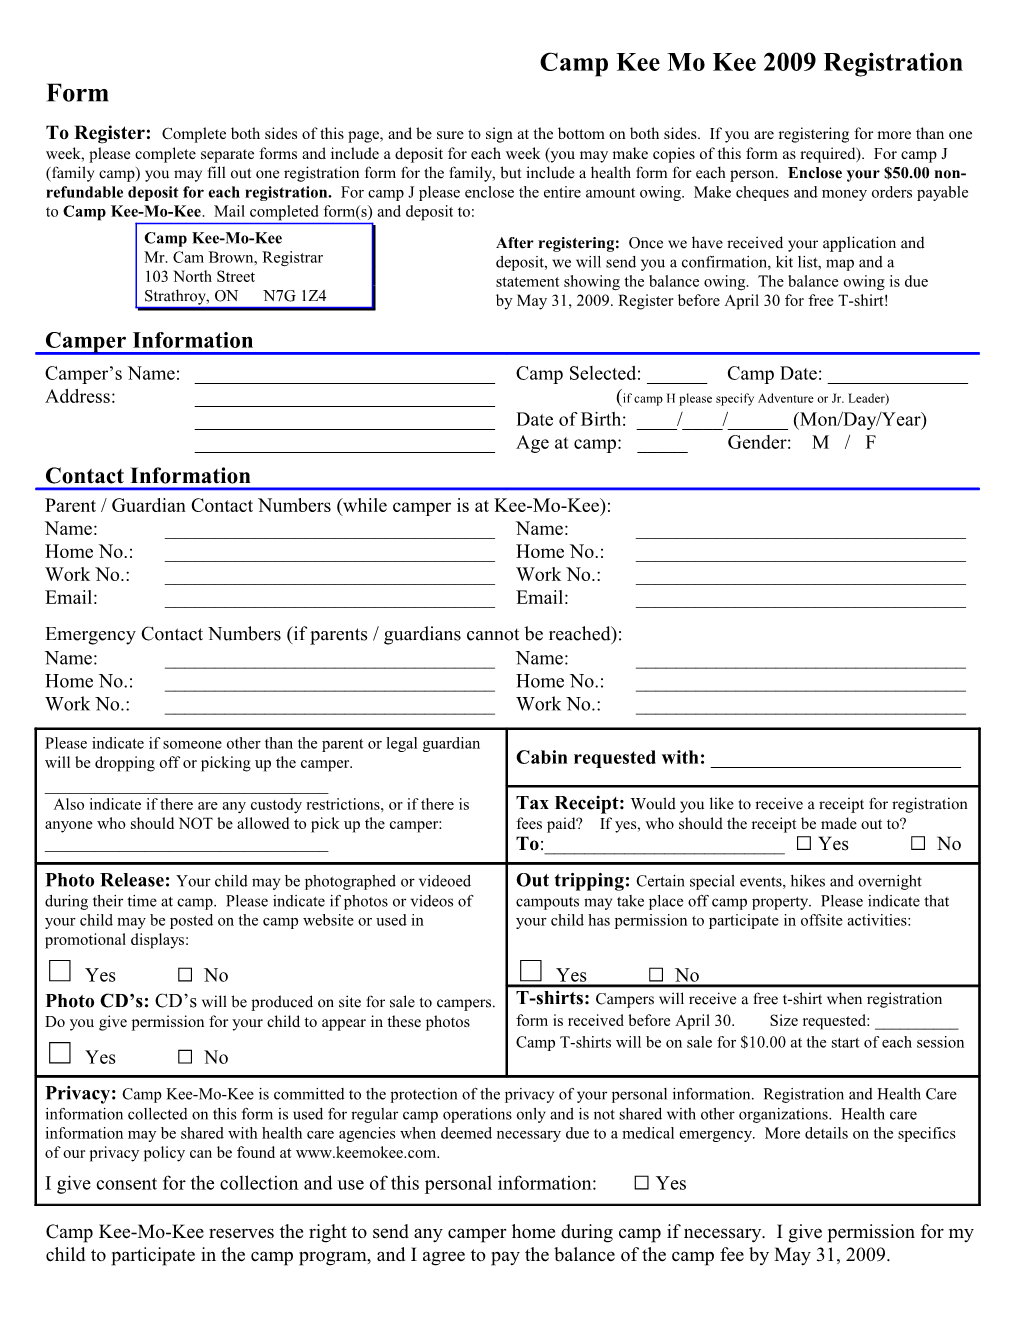 Camp Kee Mo Kee 2009 Registration Form